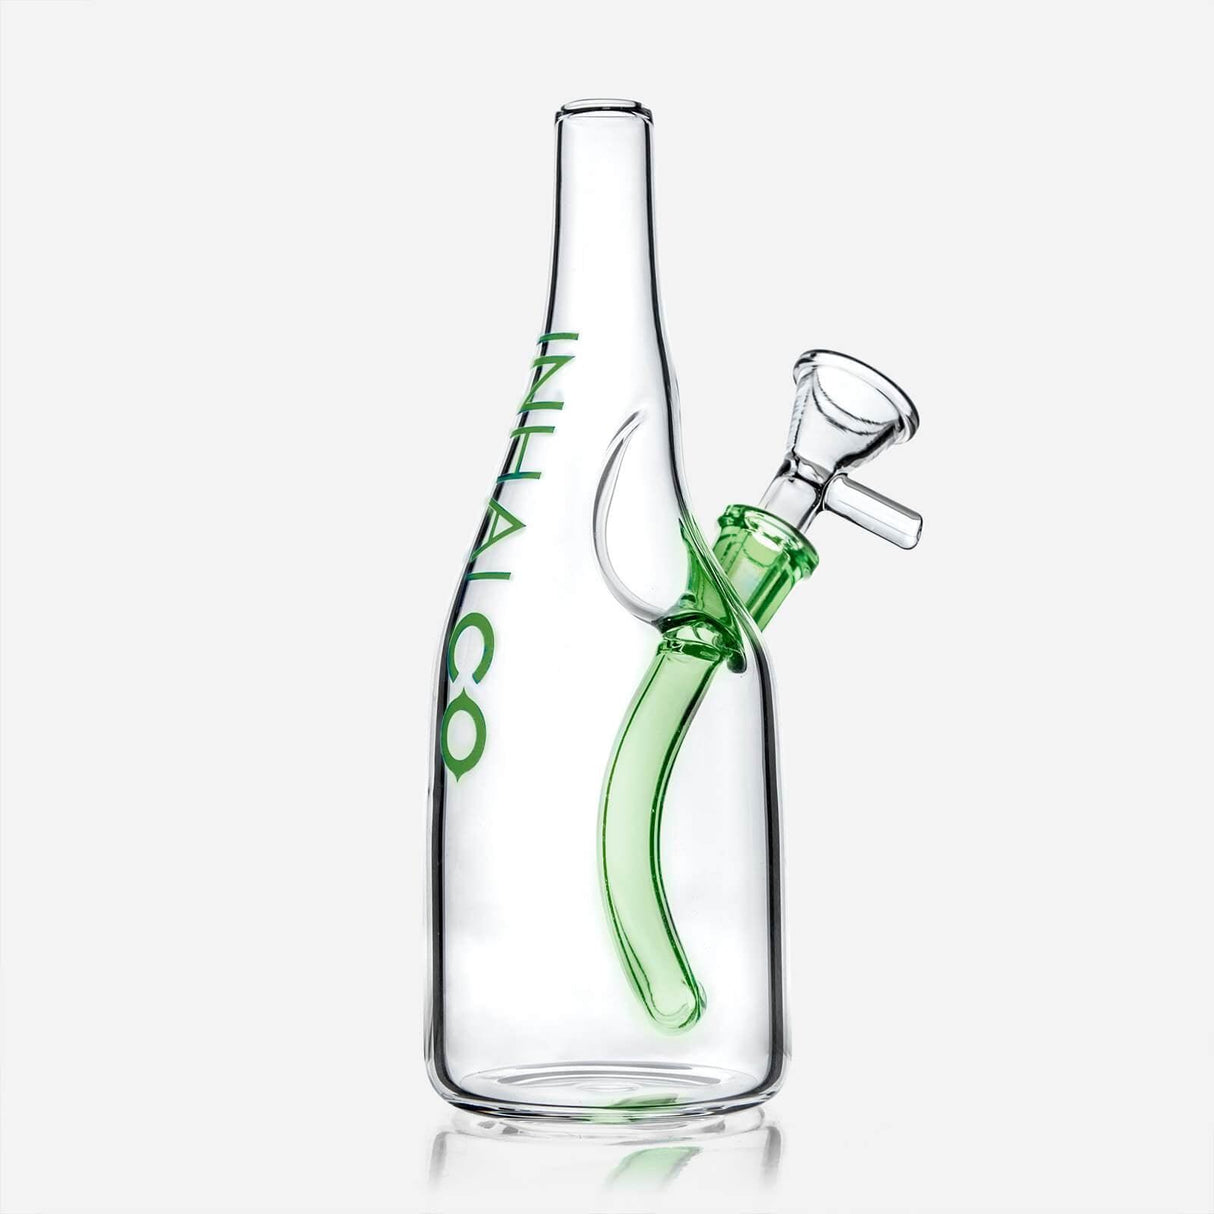 PILOTDIARY Sake Bottle Glass Water Bong with Green Accents - Front View